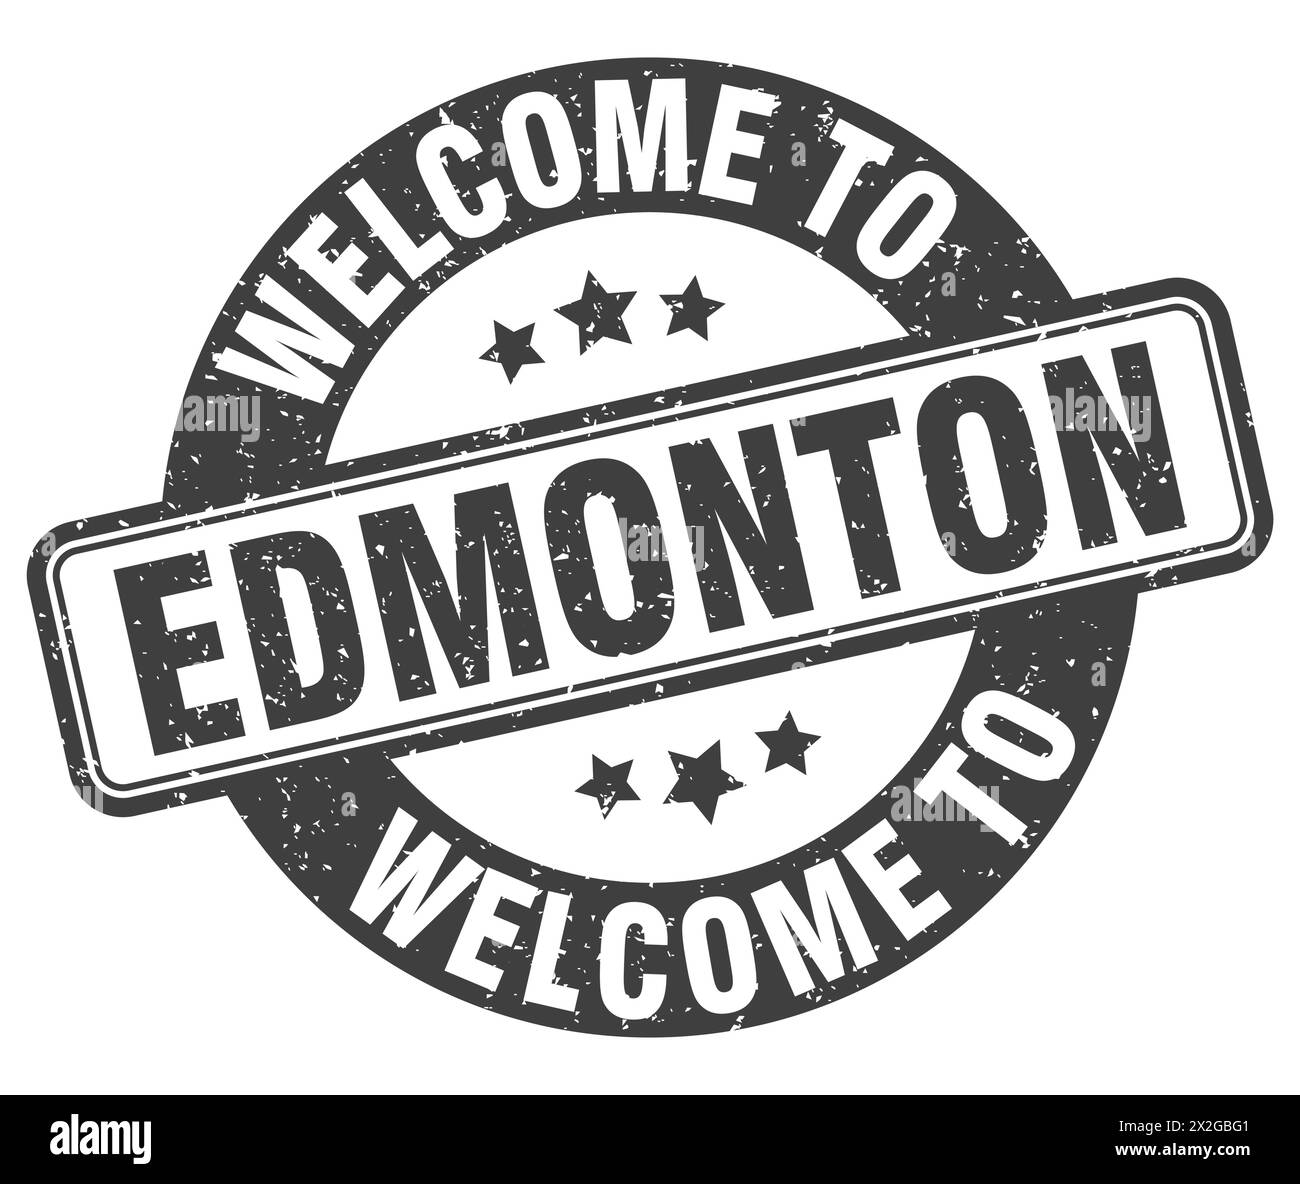 Welcome to Edmonton stamp. Edmonton round sign isolated on white background Stock Vector